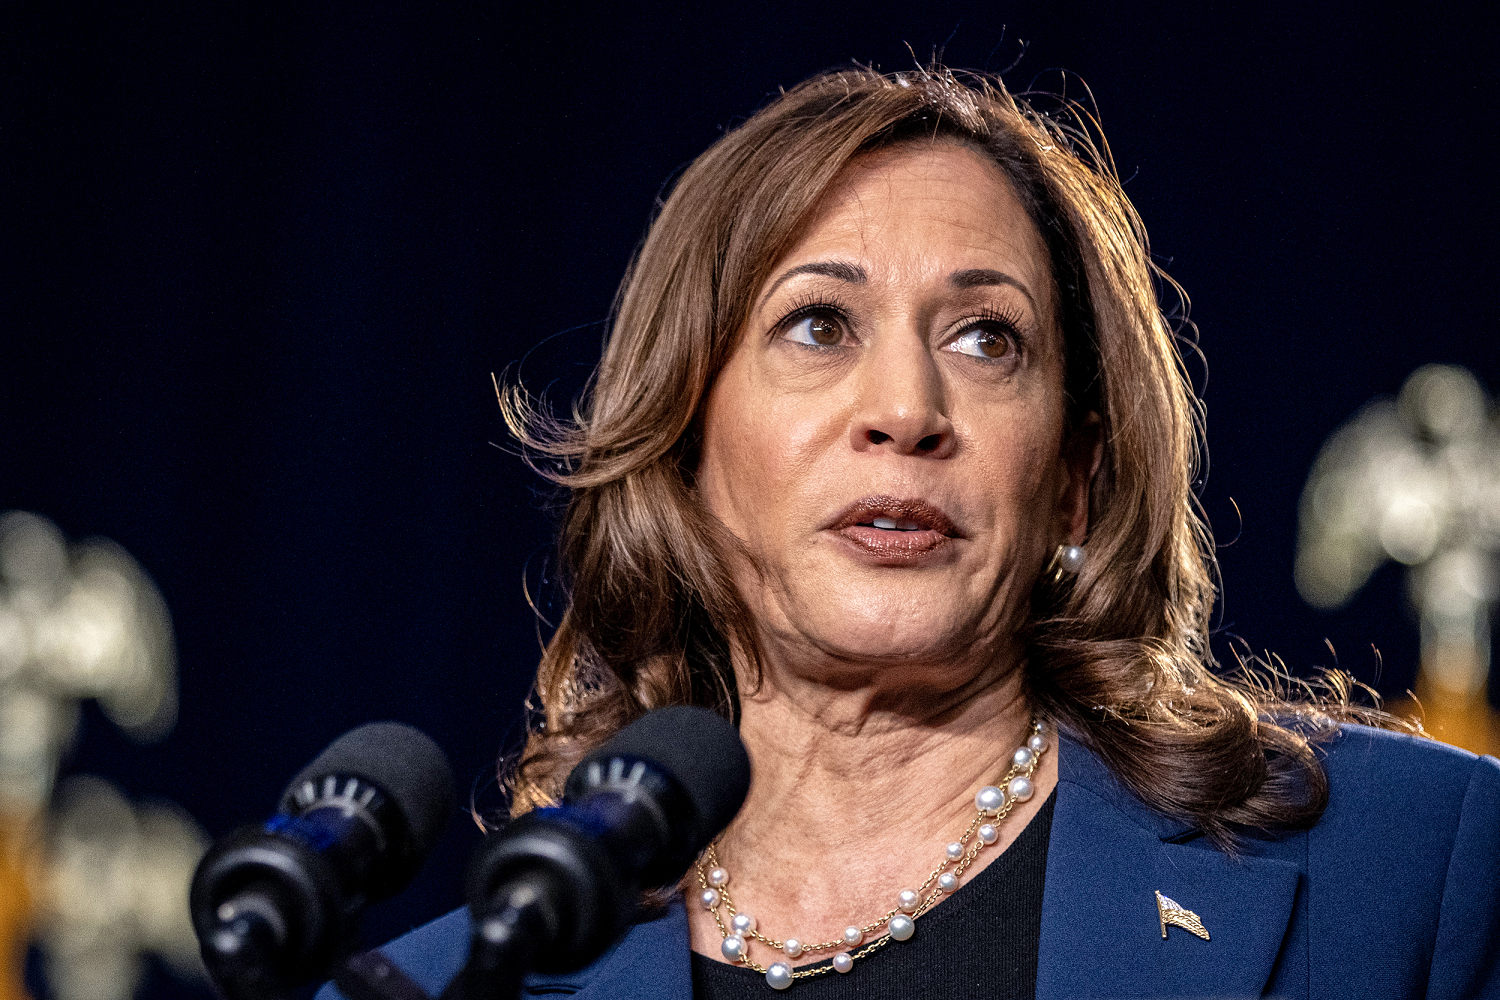 'DEI' attacks on Kamala Harris come after a year of steadily deploying the insult at Black people in positions of power